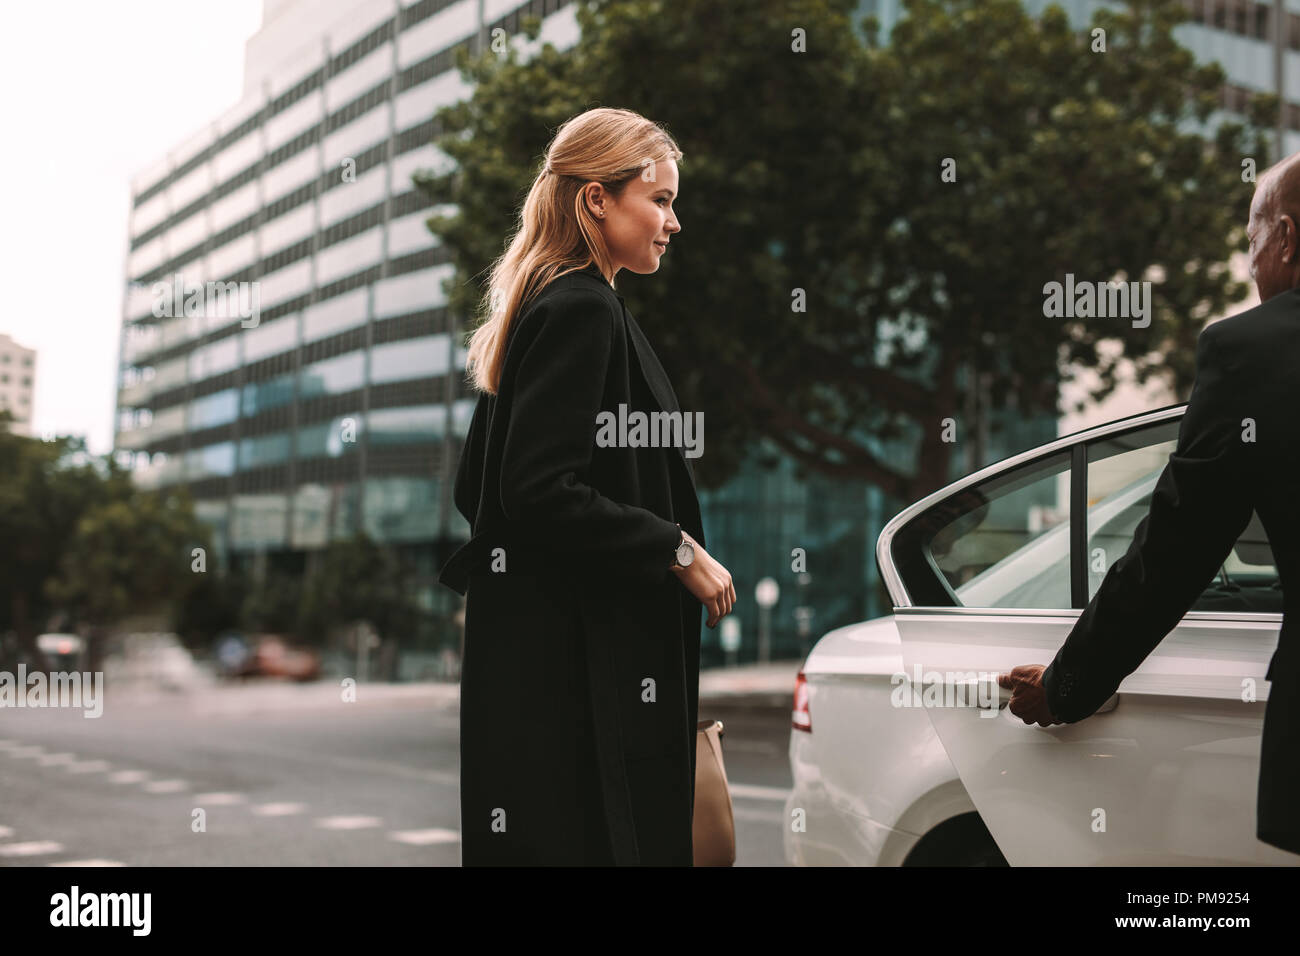 Young female commuter getting into a taxi. Businesswoman entering a taxi with driver opening door. Stock Photo